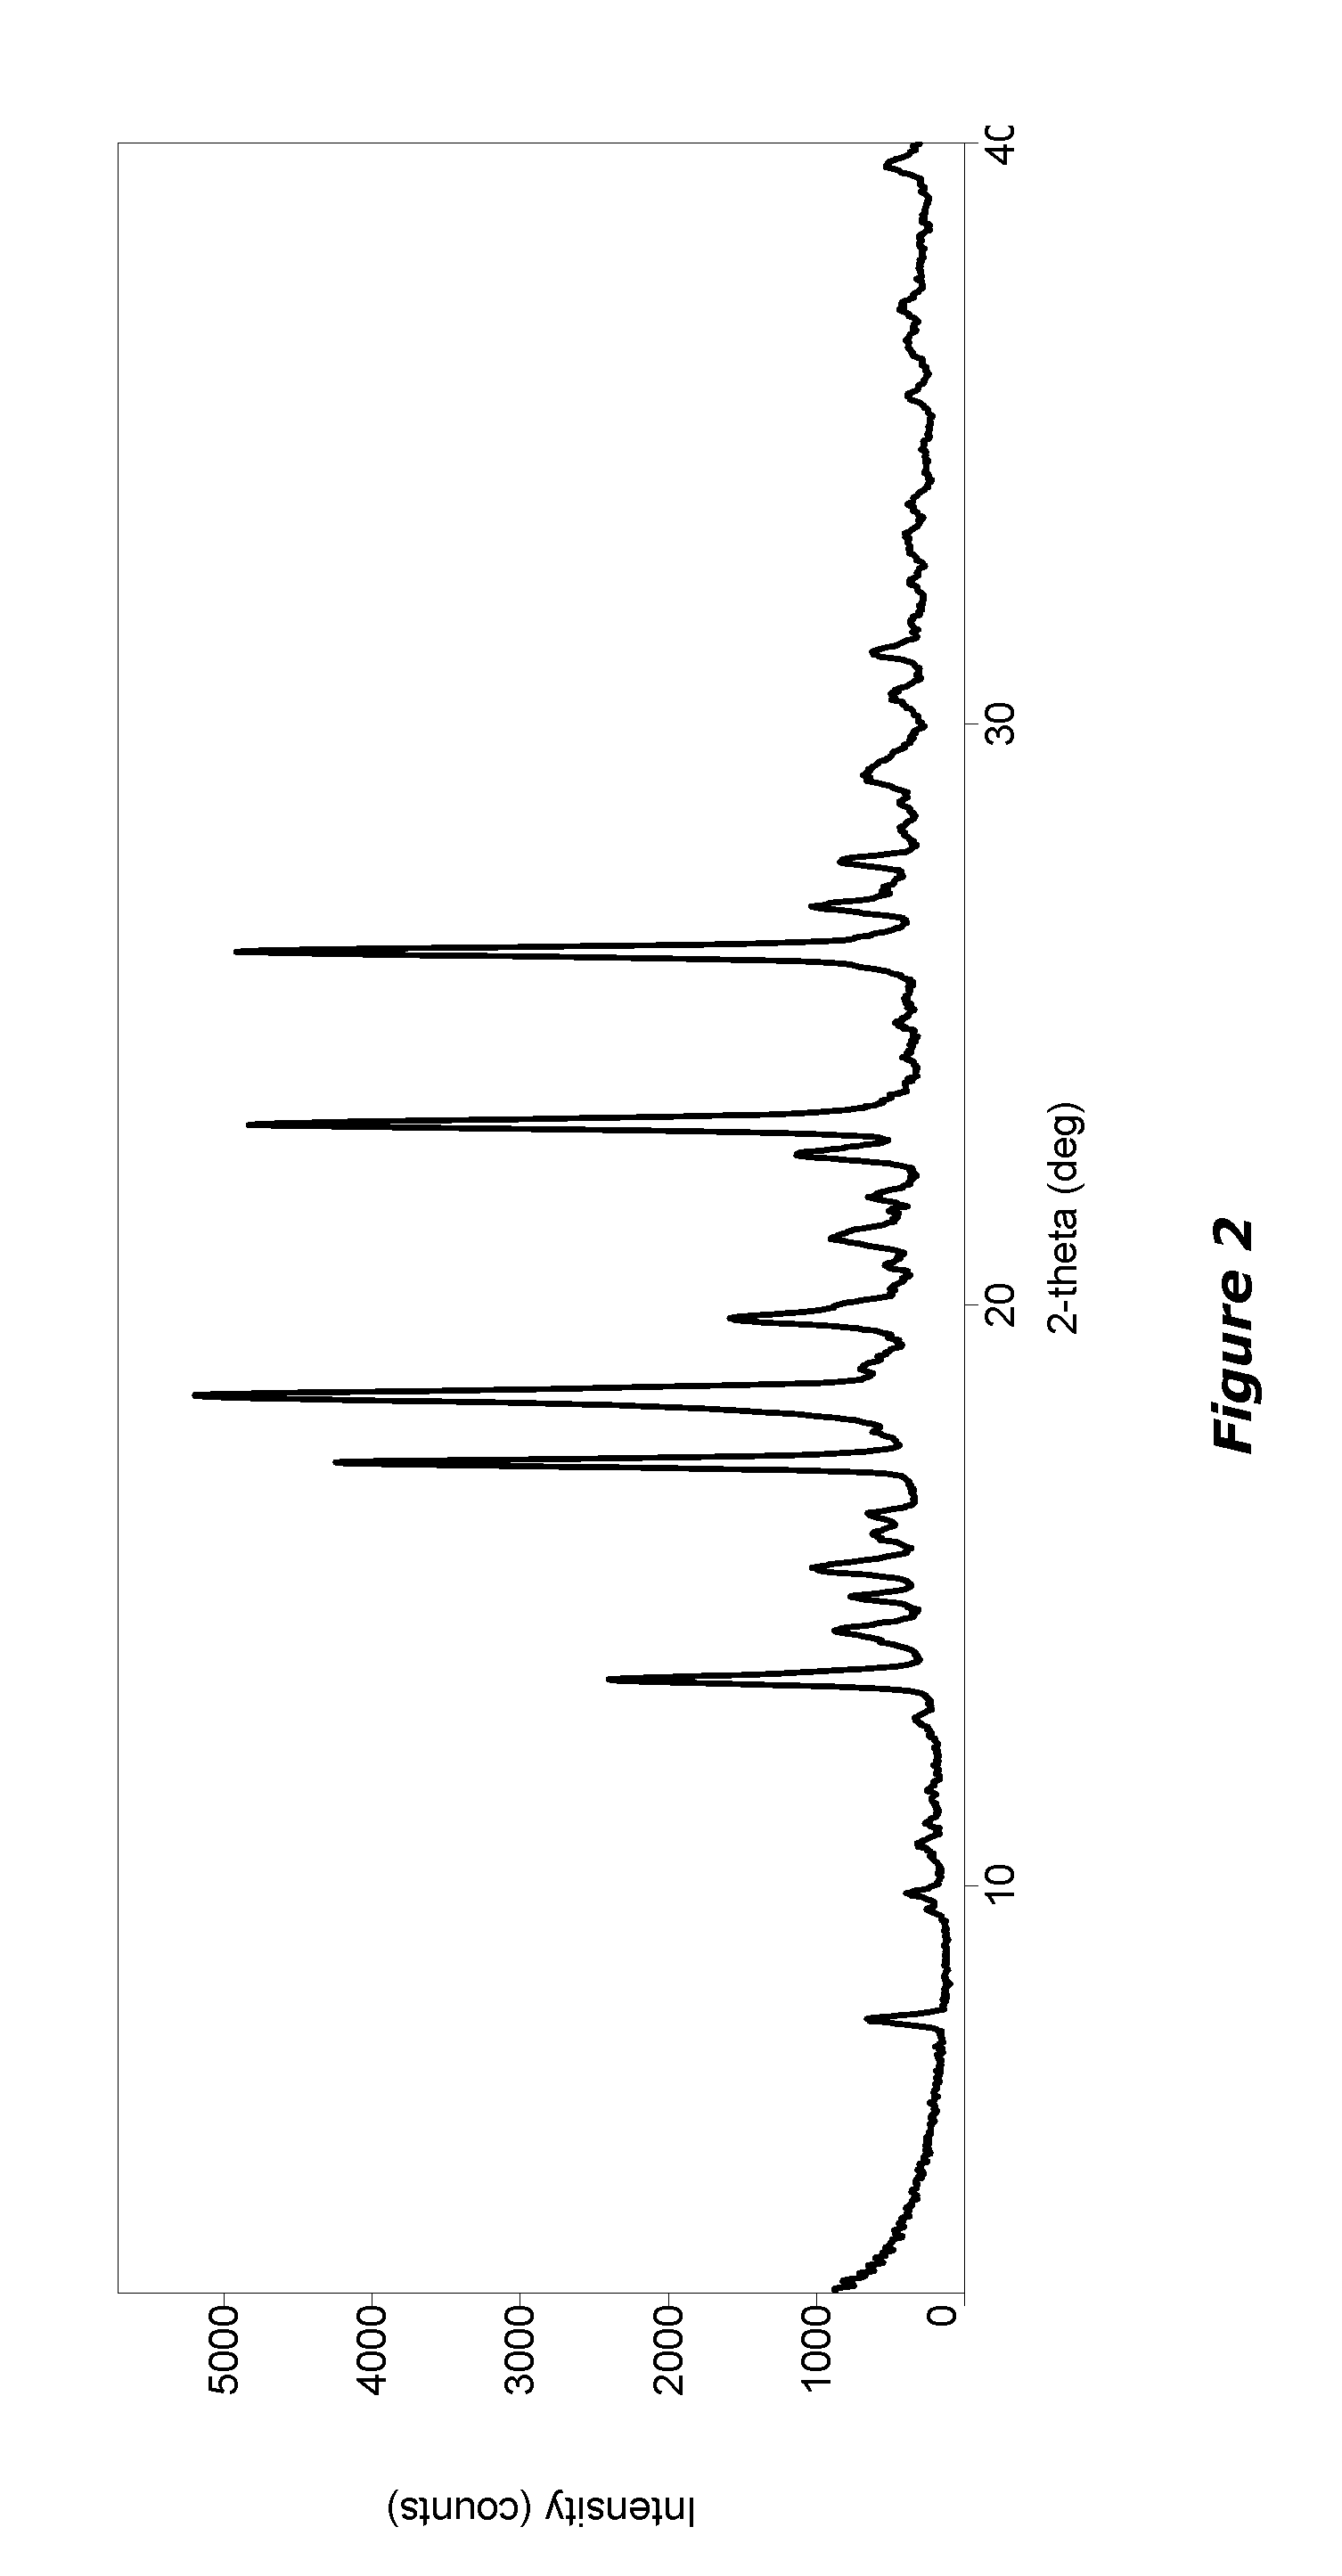 Crystalline forms of therapeutic compounds and uses thereof